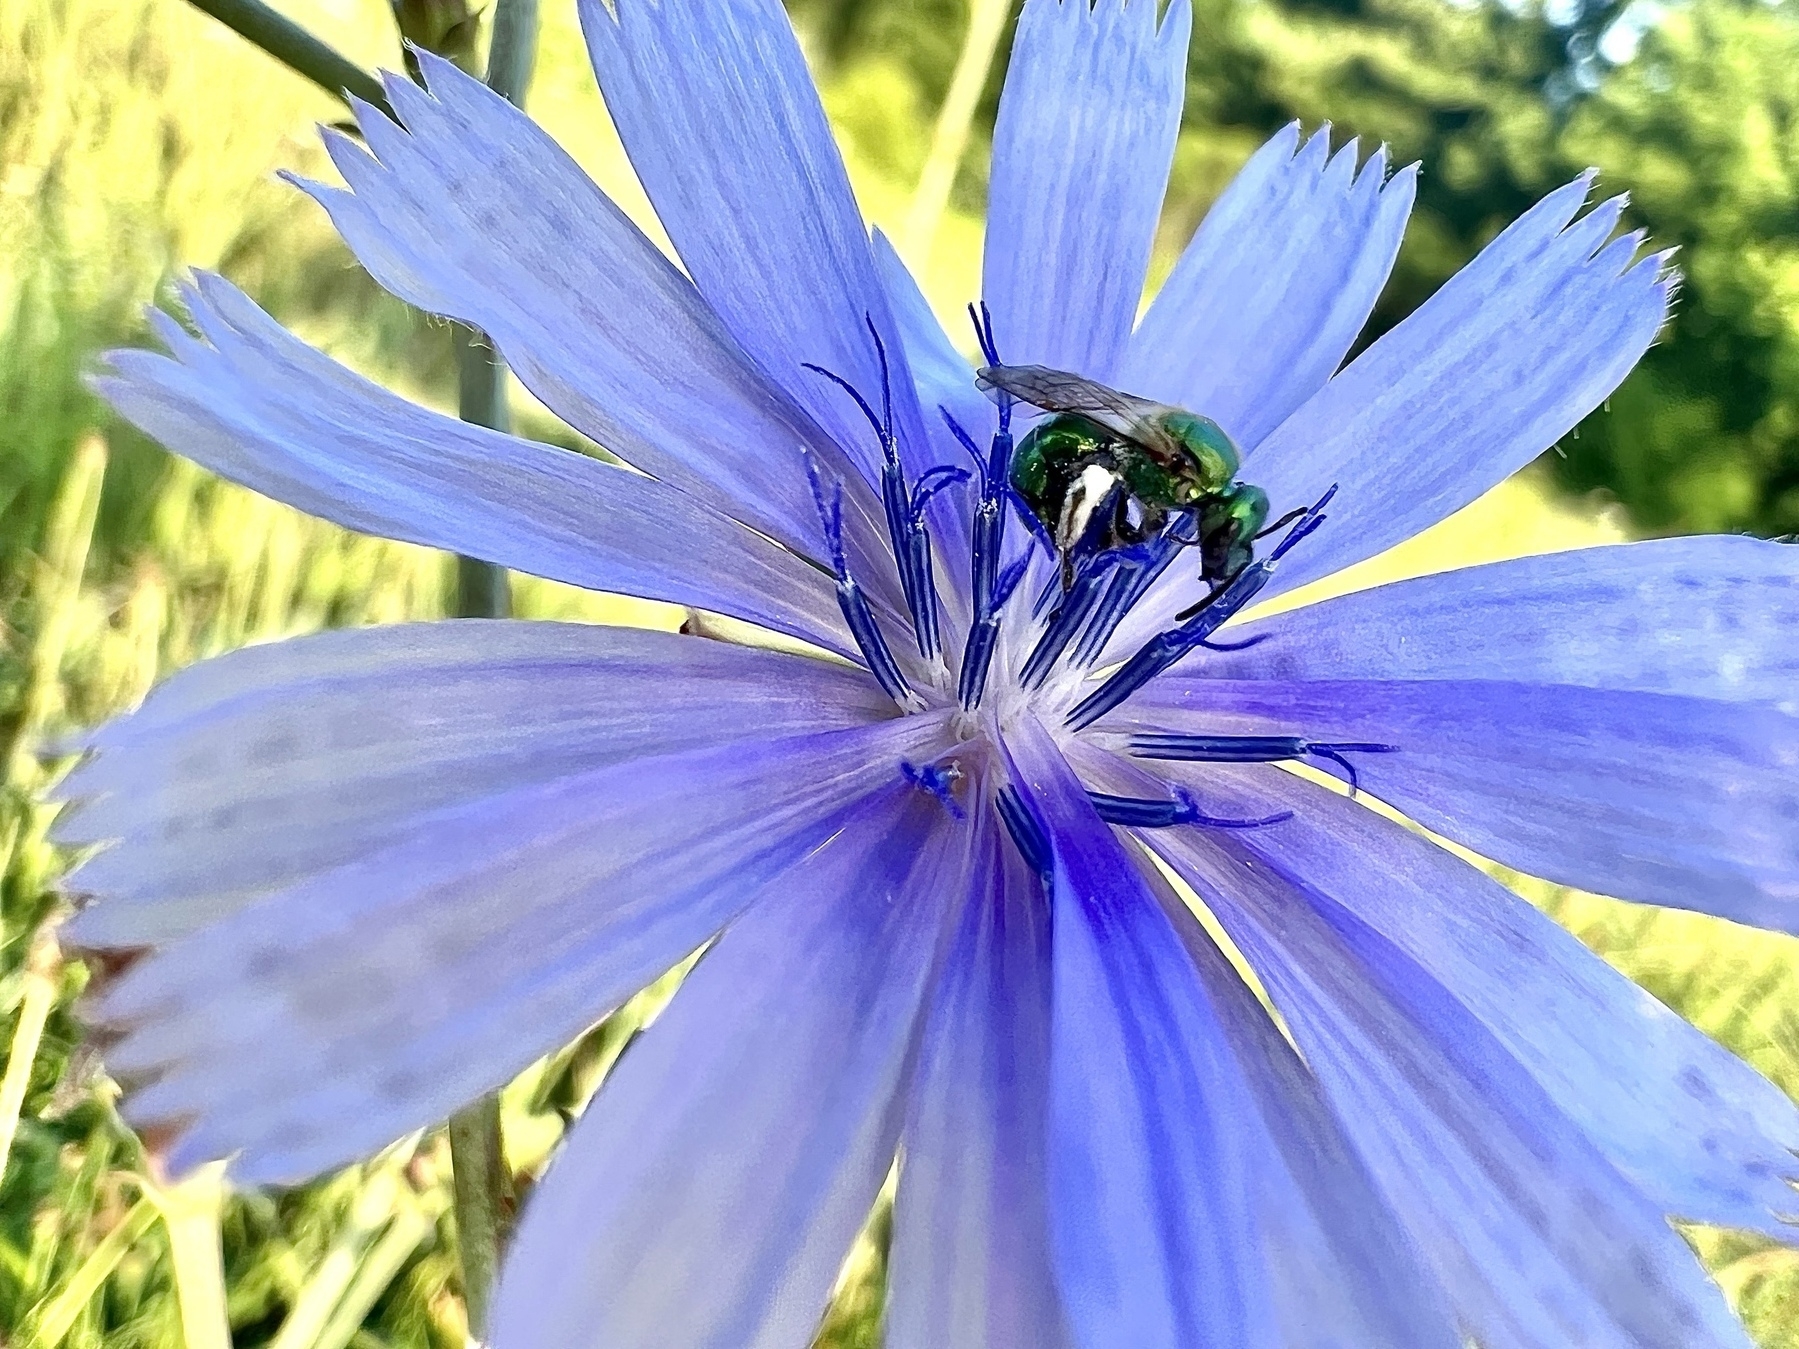 A tiny green bee is collecting pollen from the center of a vibrant blue flower set against a blurred green field